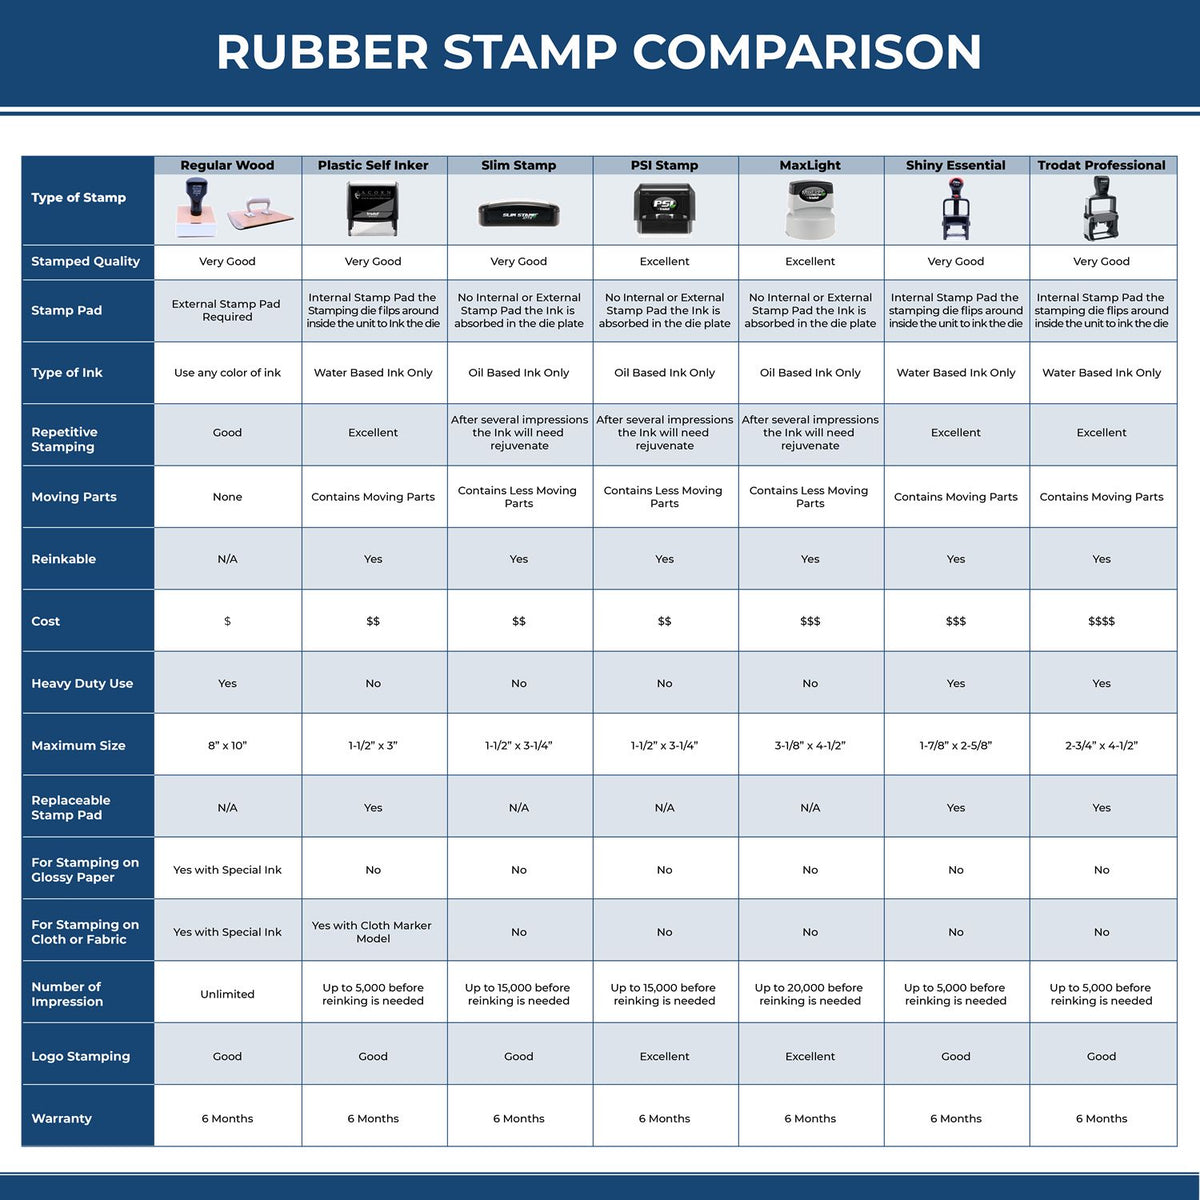 Large Self-Inking Cancelado Stamp 5533S Rubber Stamp Comparison